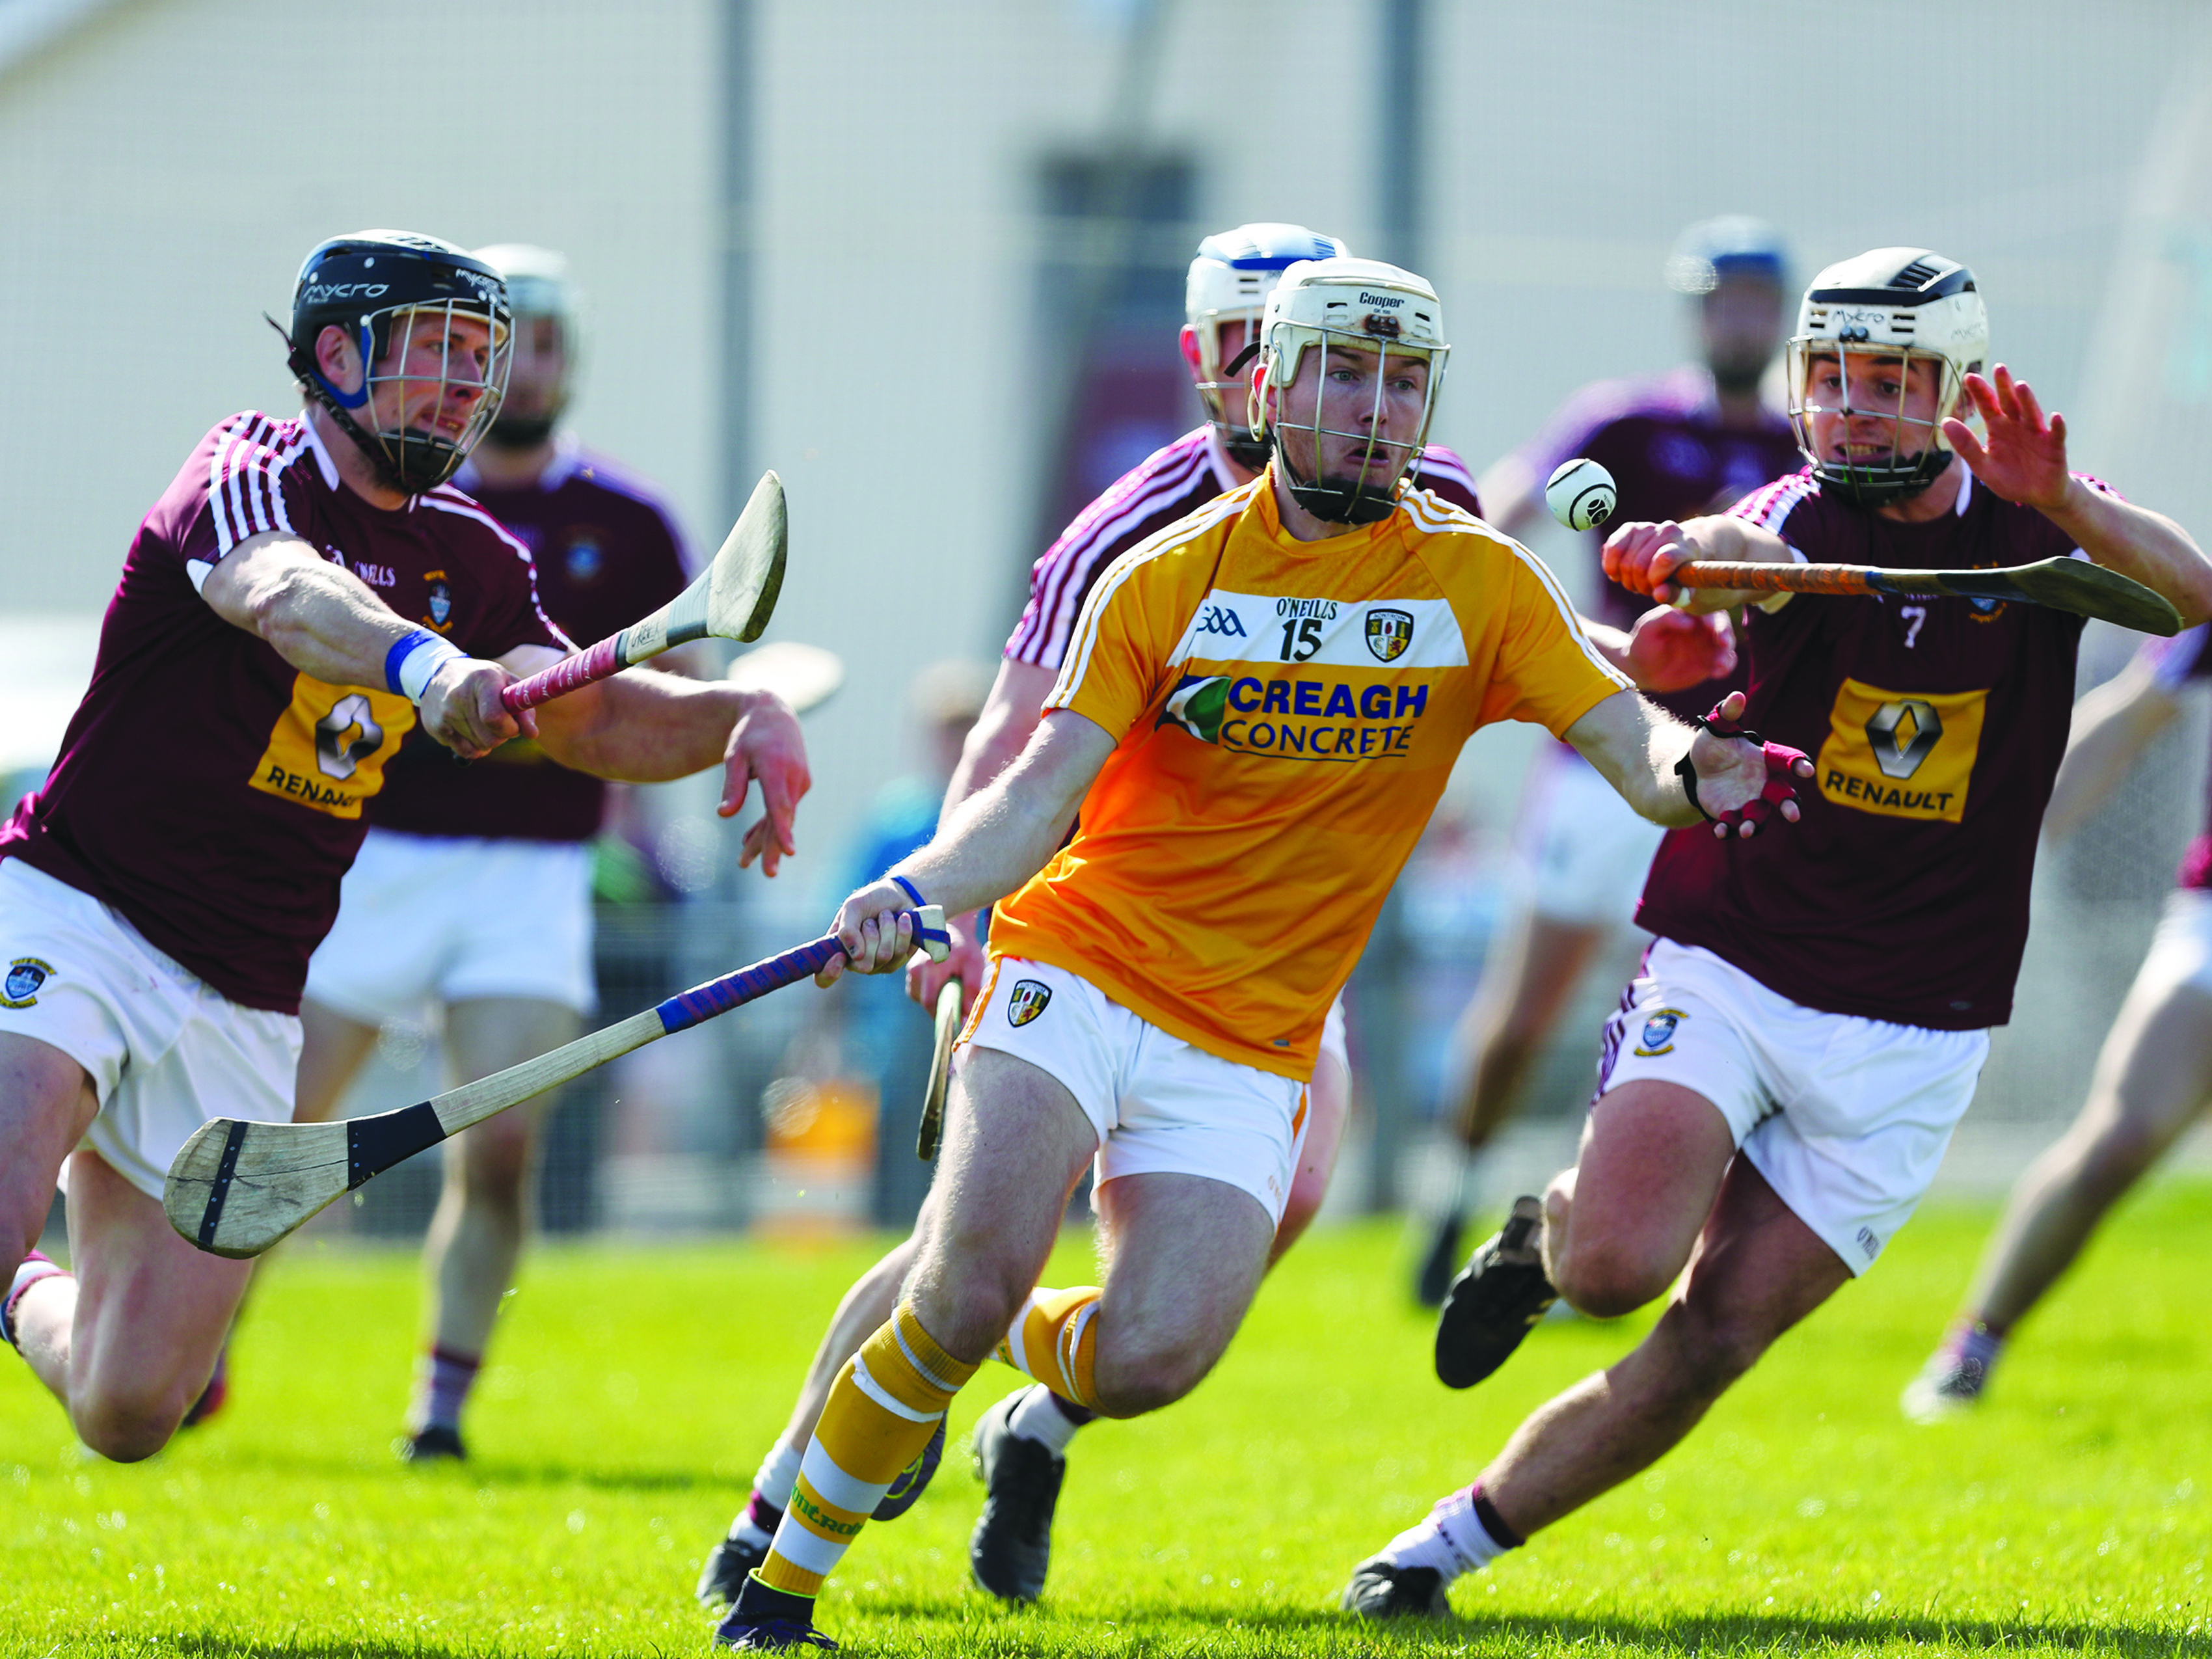 Deaglan Murphy hit a dozen points for Antrim against Westmeath at the weekend and his performance drew praise from assistant manager, Neal Peden